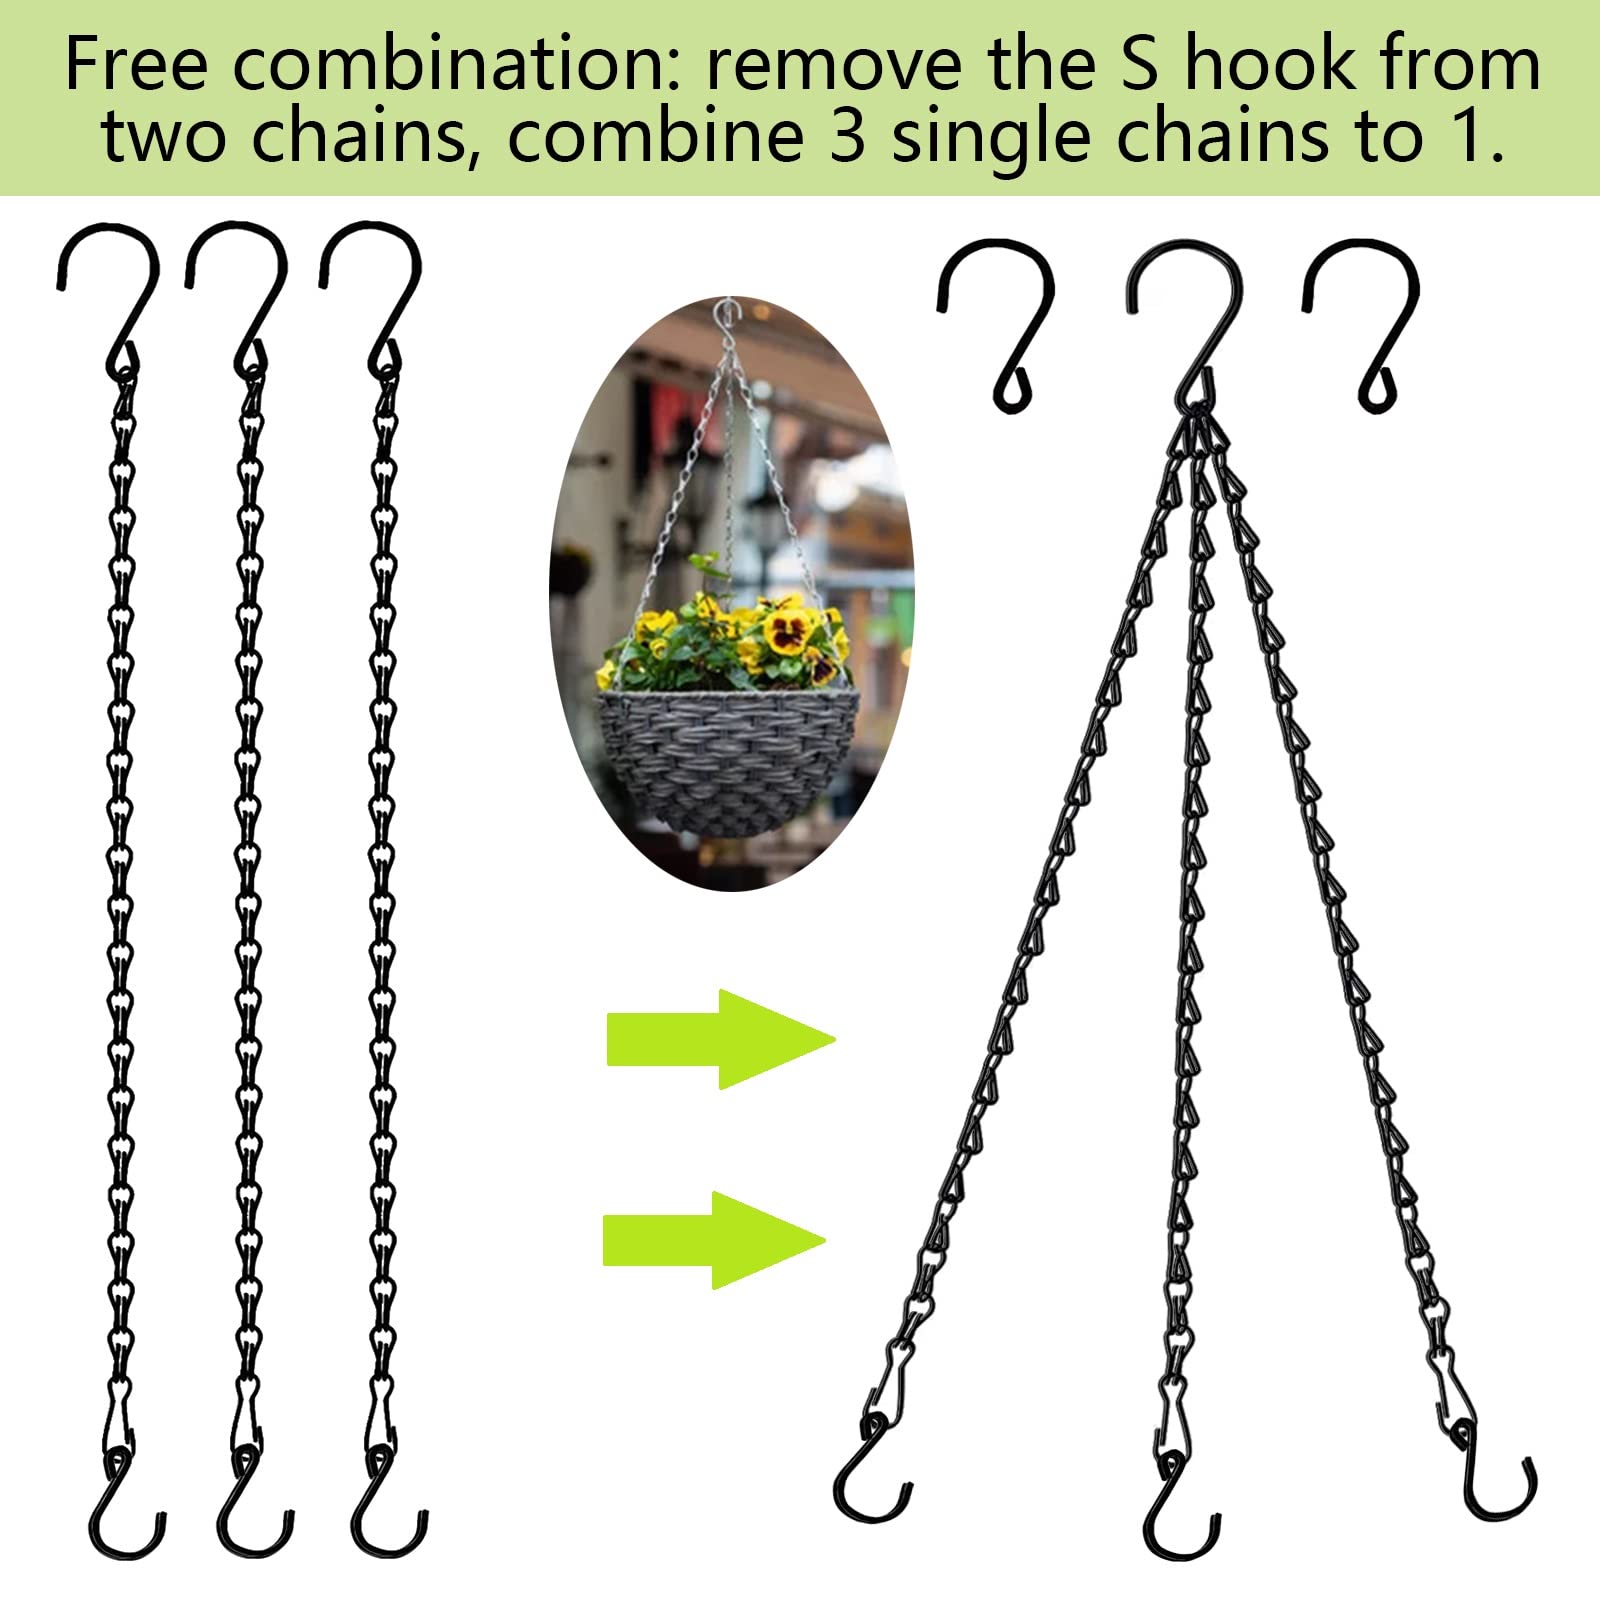 RIFNY Hanging Chains with Hooks, 10 Pieces 19 Inch Black Chain for Hanging Bird Feeders Planters Baskets Billboards Lanterns Wind Chimes Ornaments Outdoor/Indoor Use（19inch 10pcs